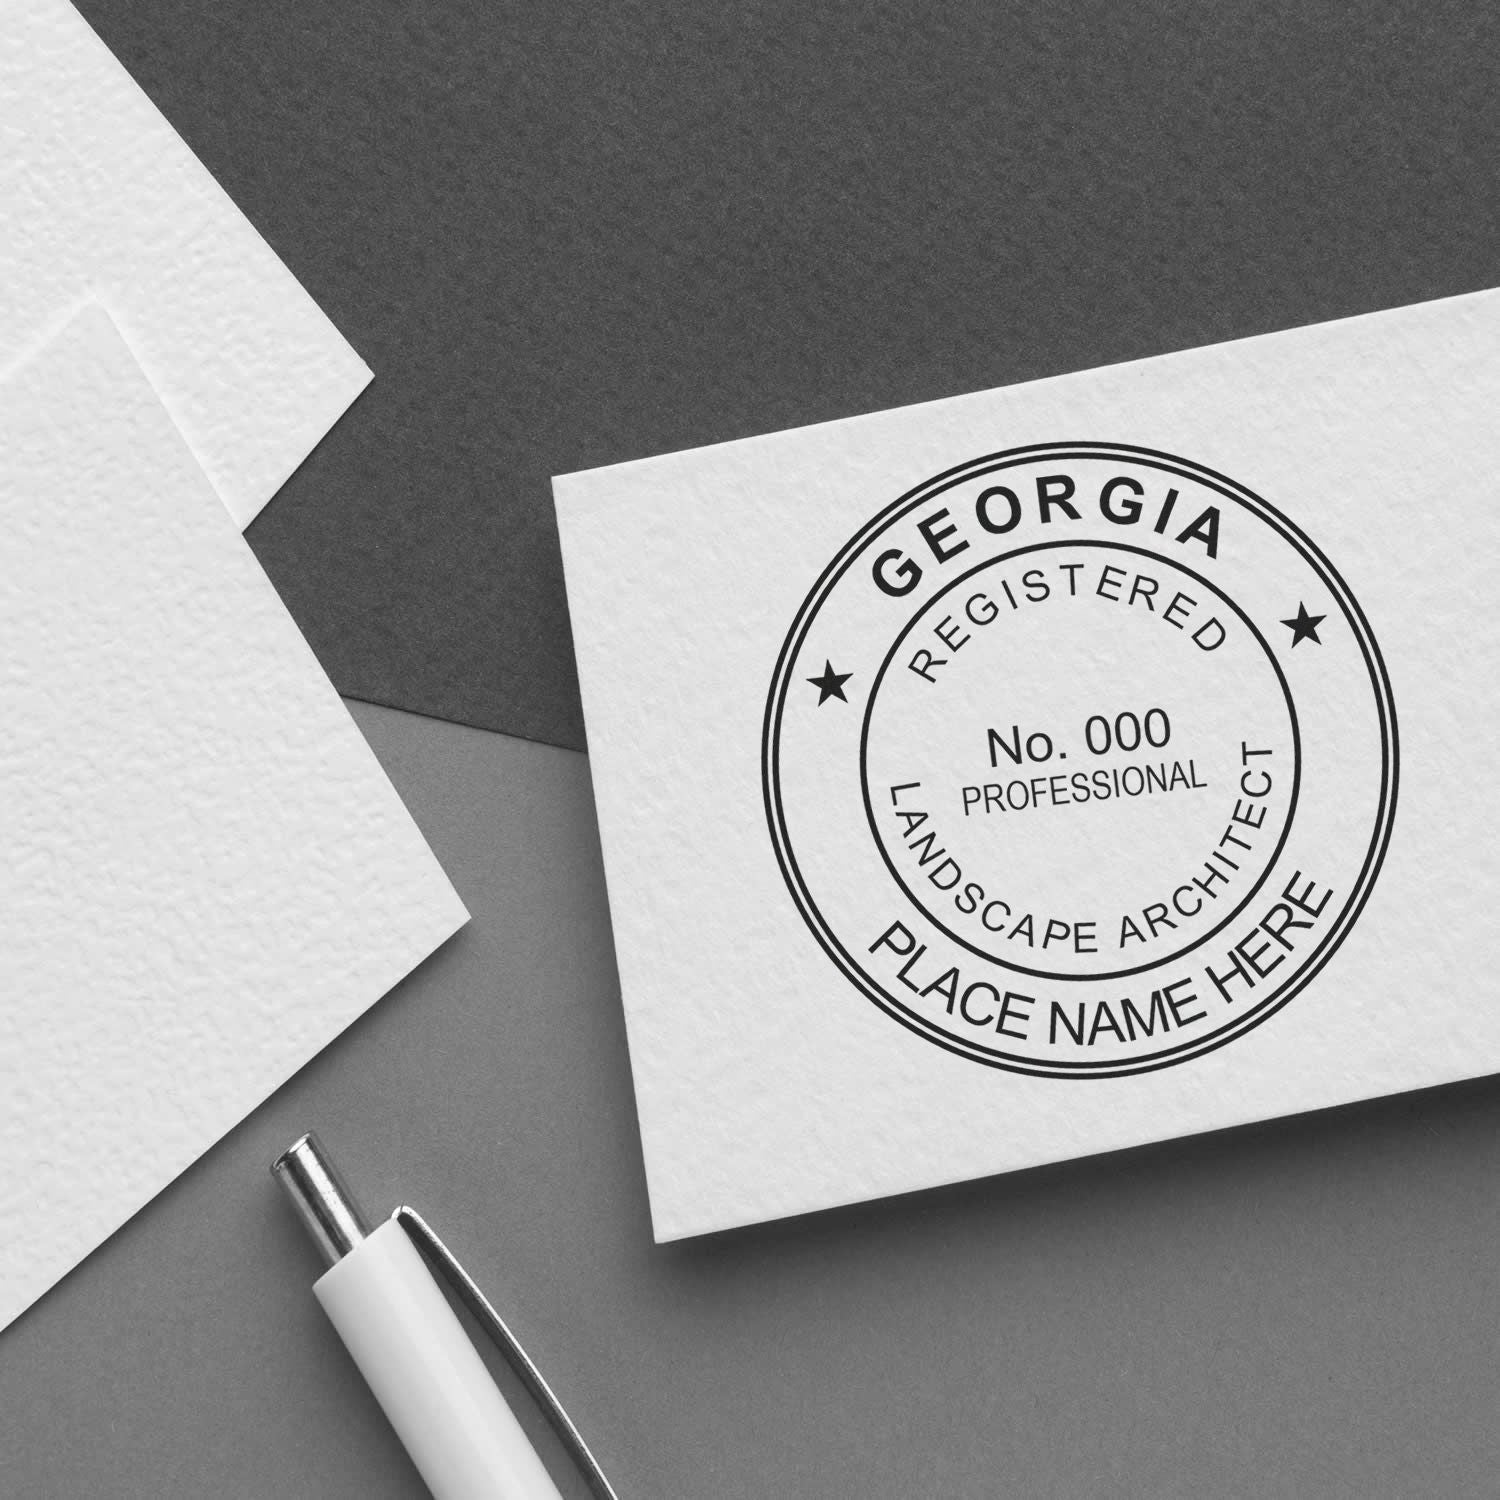 Georgia Landscape Architect Stamp: Your Key to Professional Excellence Feature Image